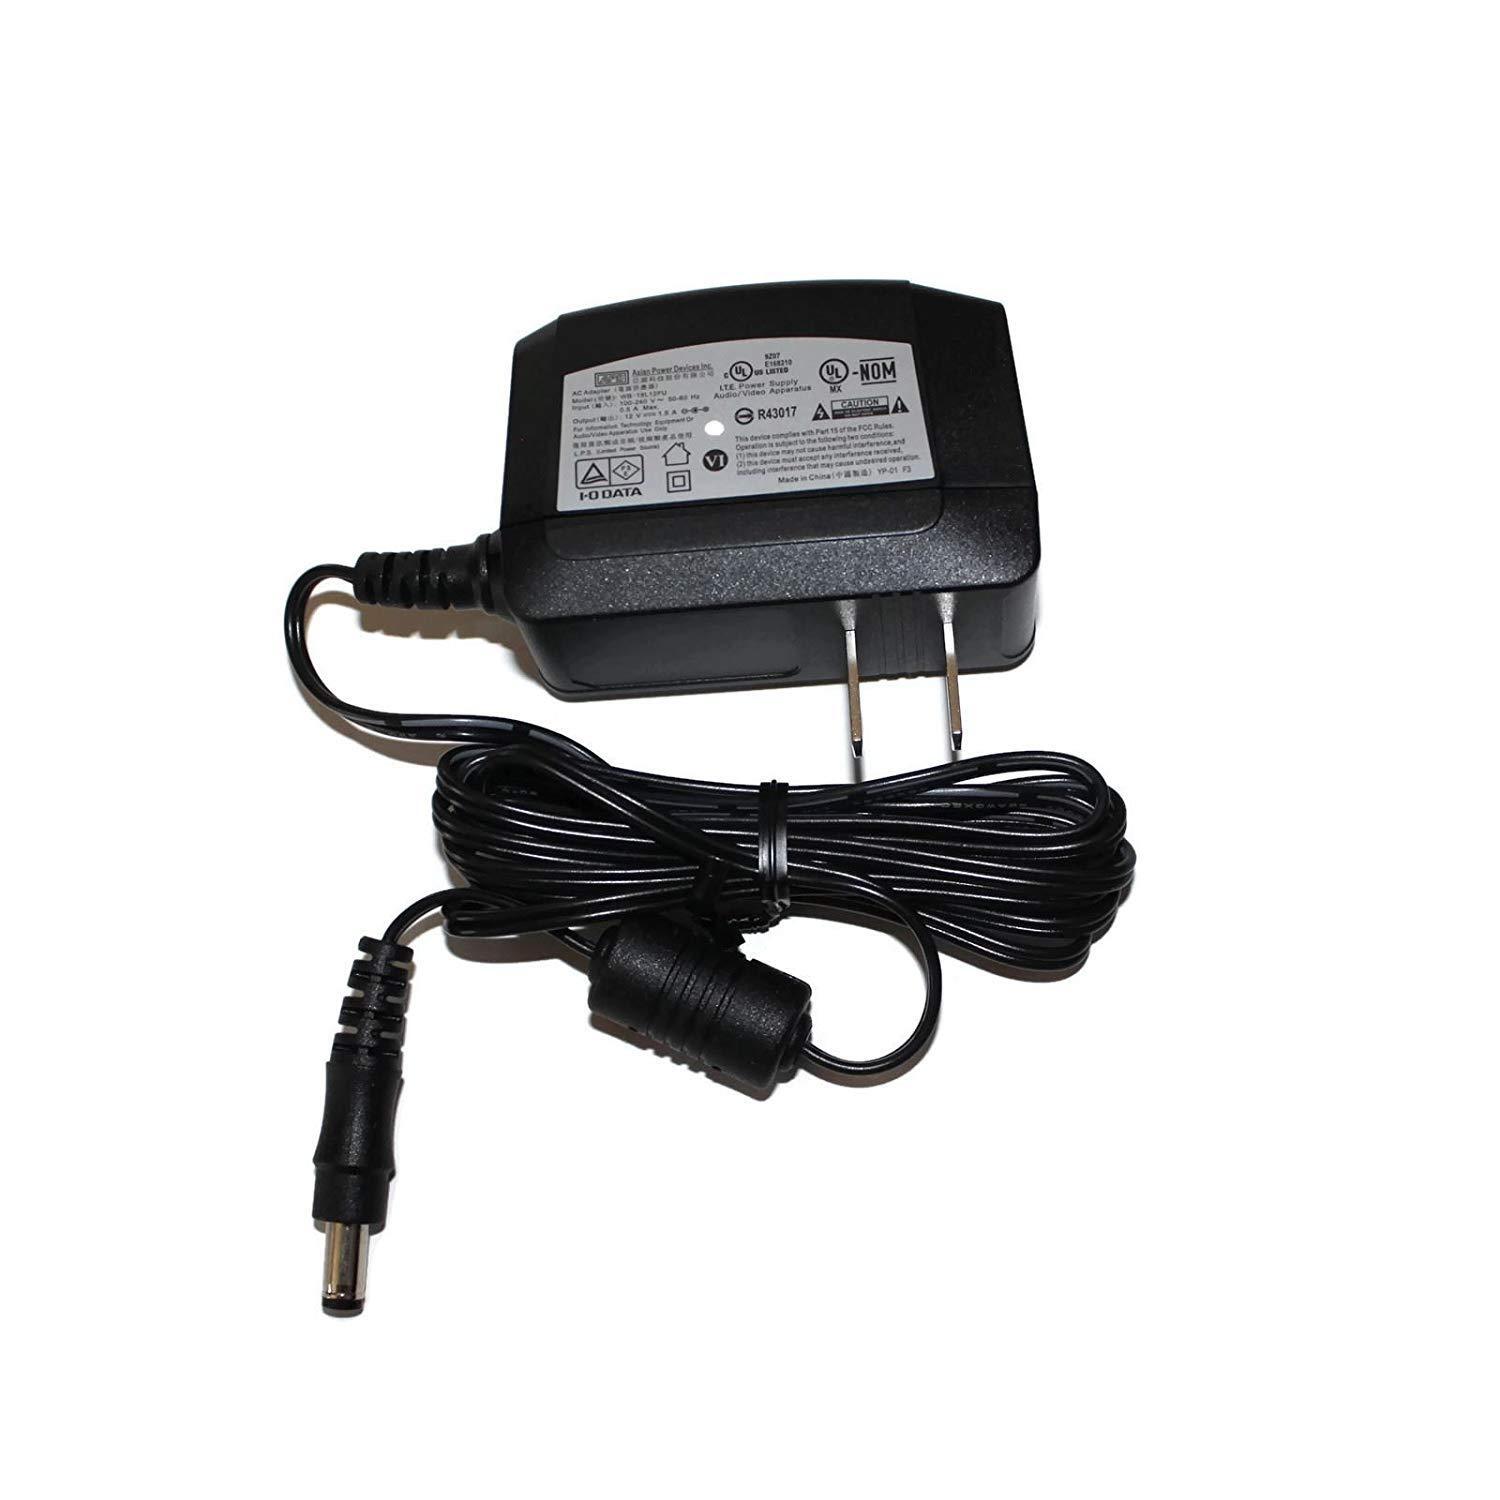 *Brand NEW* APD 12V 1.5A AC Adapter 120-240V 50-60Hz for WD / Seagate HDD WB-18L12FU POWER Supply - Click Image to Close